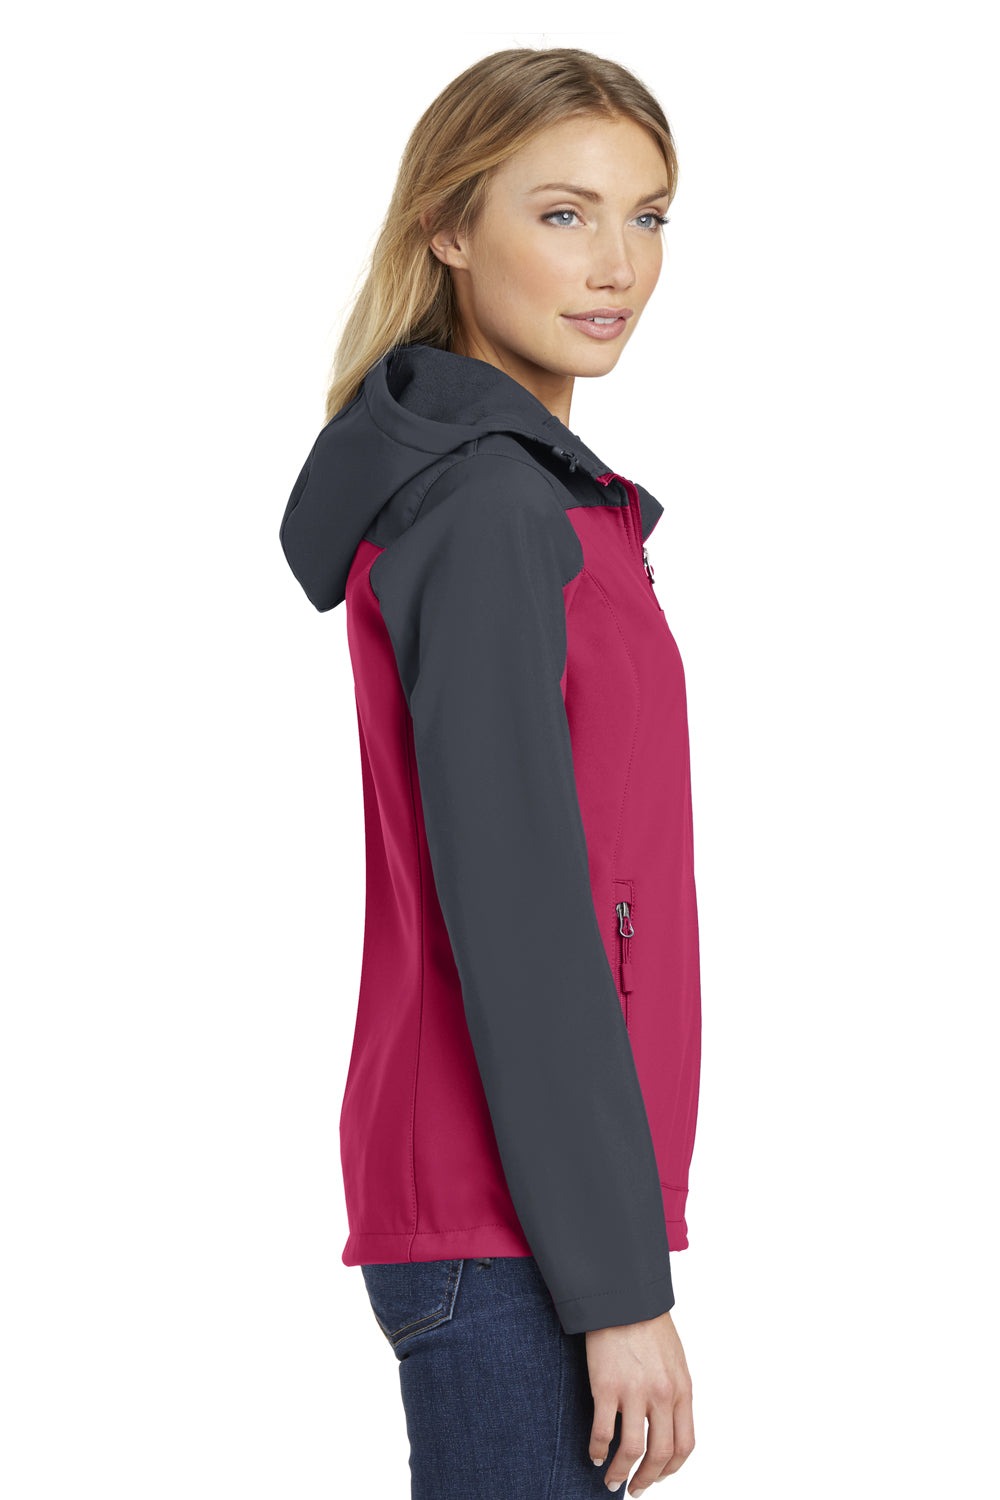 Port Authority L335 Womens Core Wind & Water Resistant Full Zip Hooded Jacket Fuchsia Pink/Grey Side